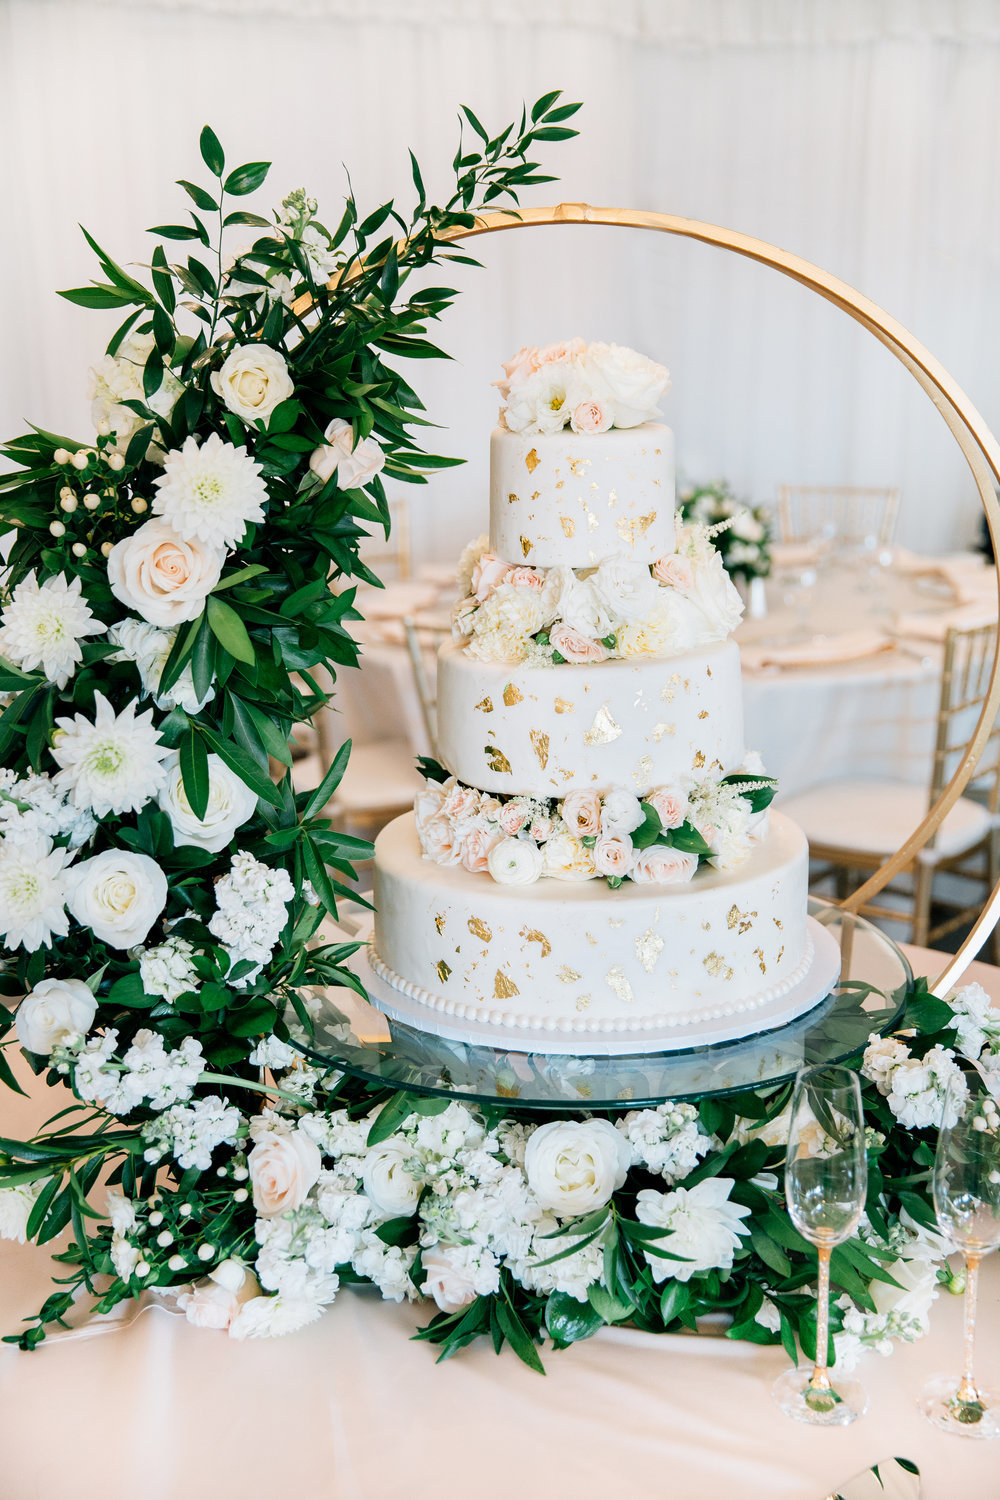 cake_round_stand_flowers_upscale_classic_reception_violette_fleurs_anna_perevertaylo.jpg